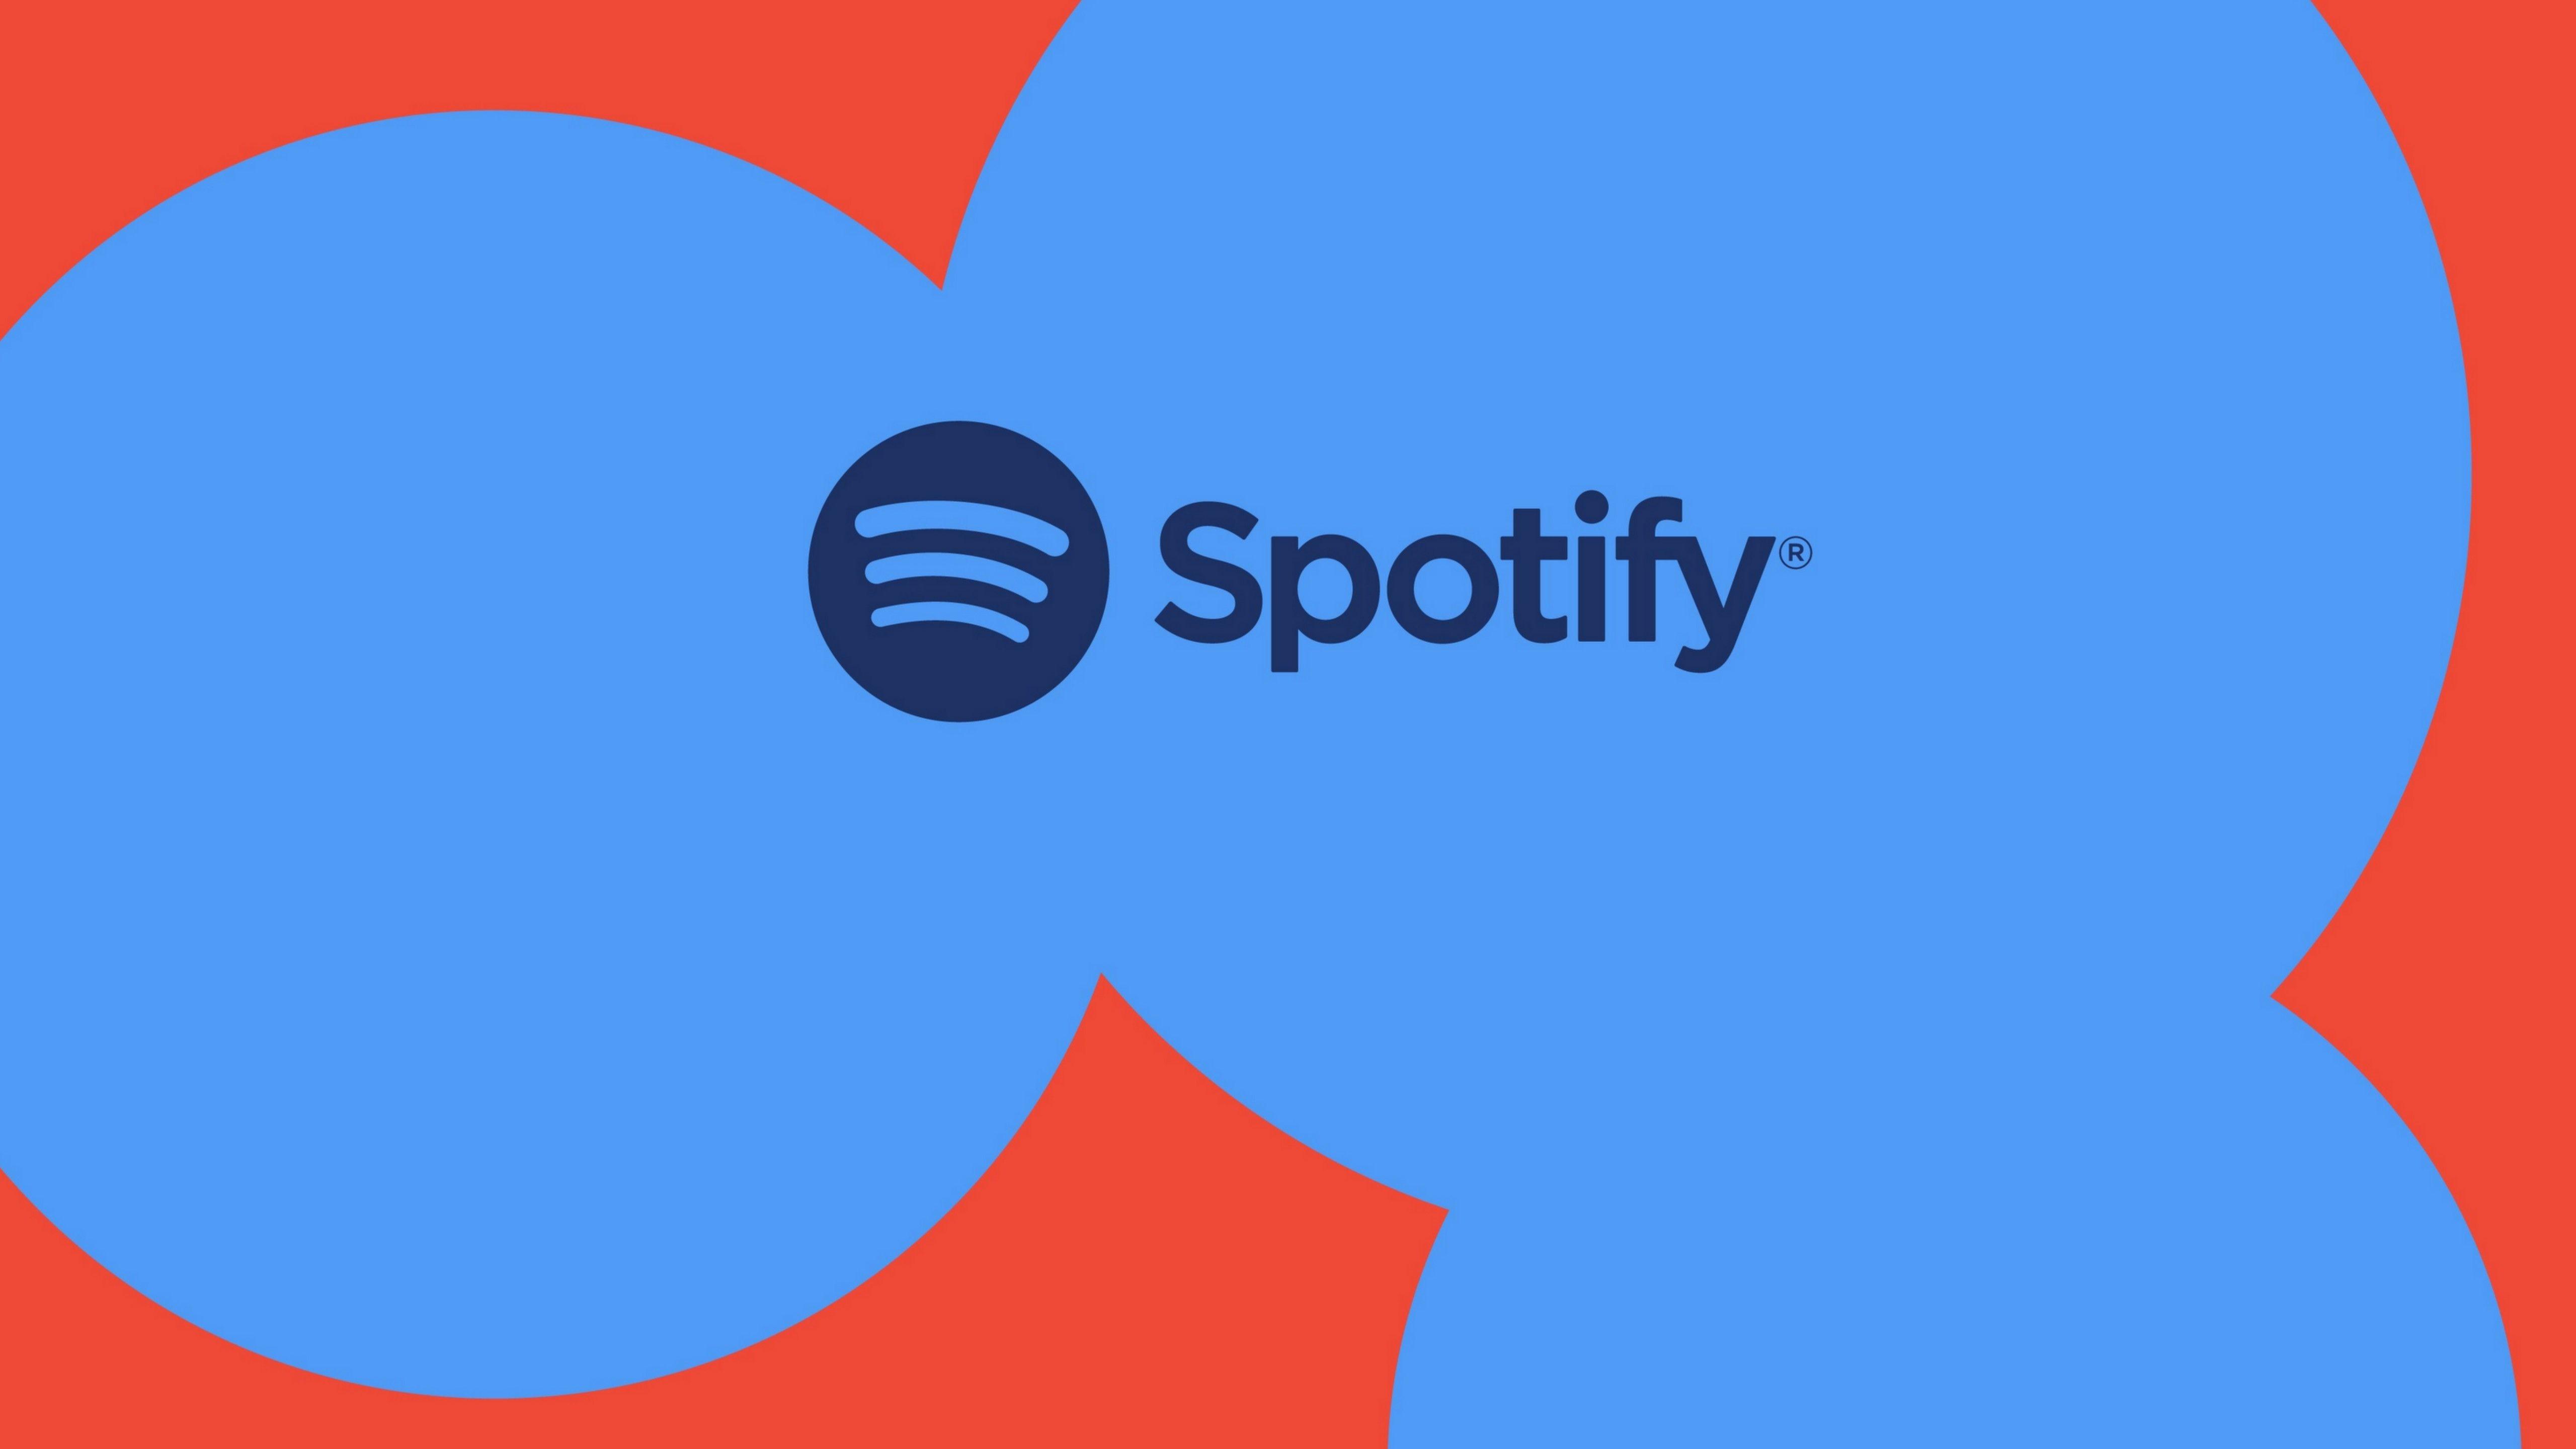 Windows Blue Logo - Spotify for Windows 10 available now in the Windows Store | Windows ...